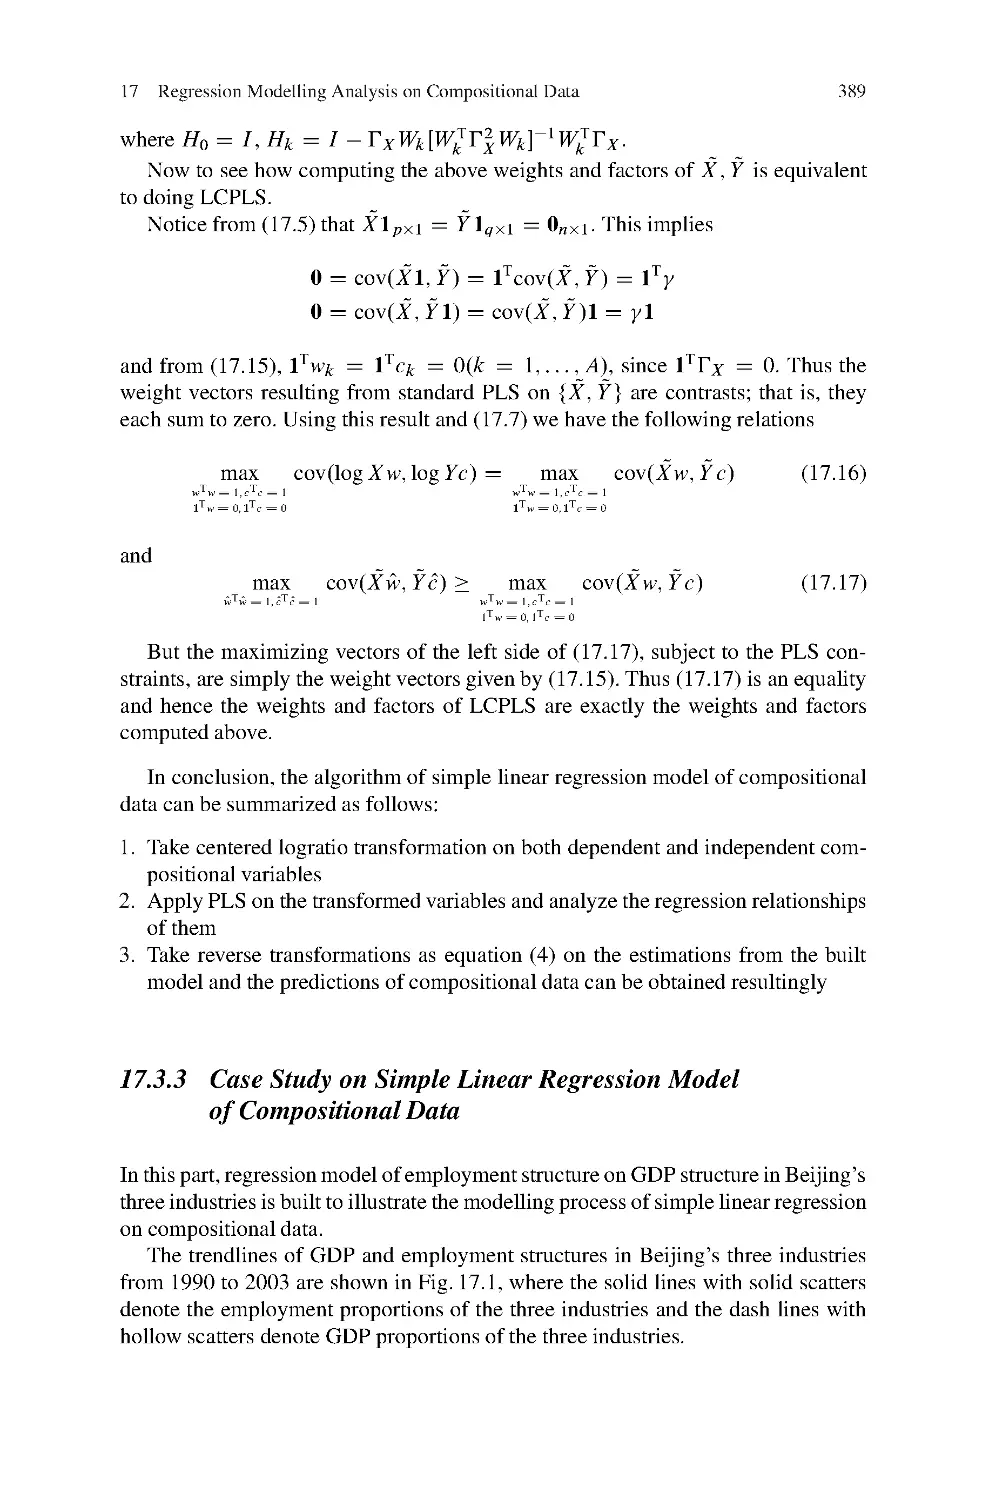 17.3.3 Case Study on Simple Linear Regression Modelof Compositional Data